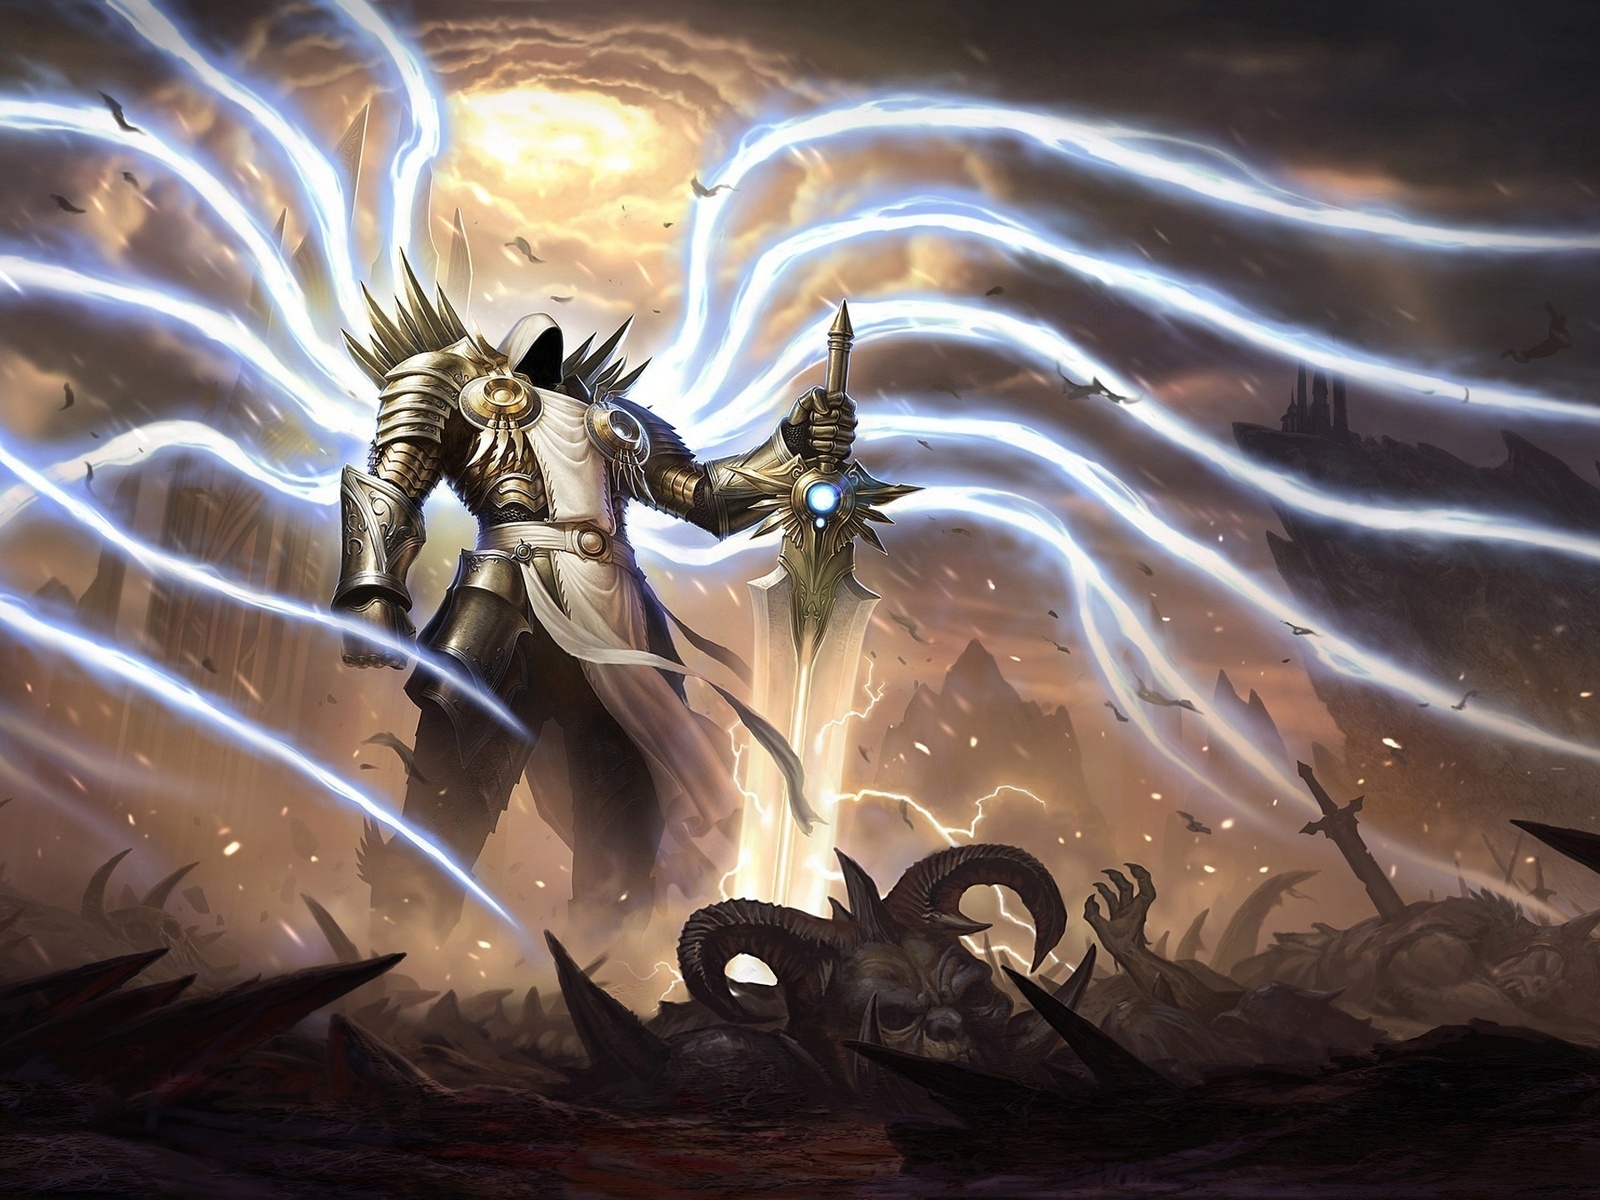 Diablo 3 Reaper of Souls Game for 1600 x 1200 resolution